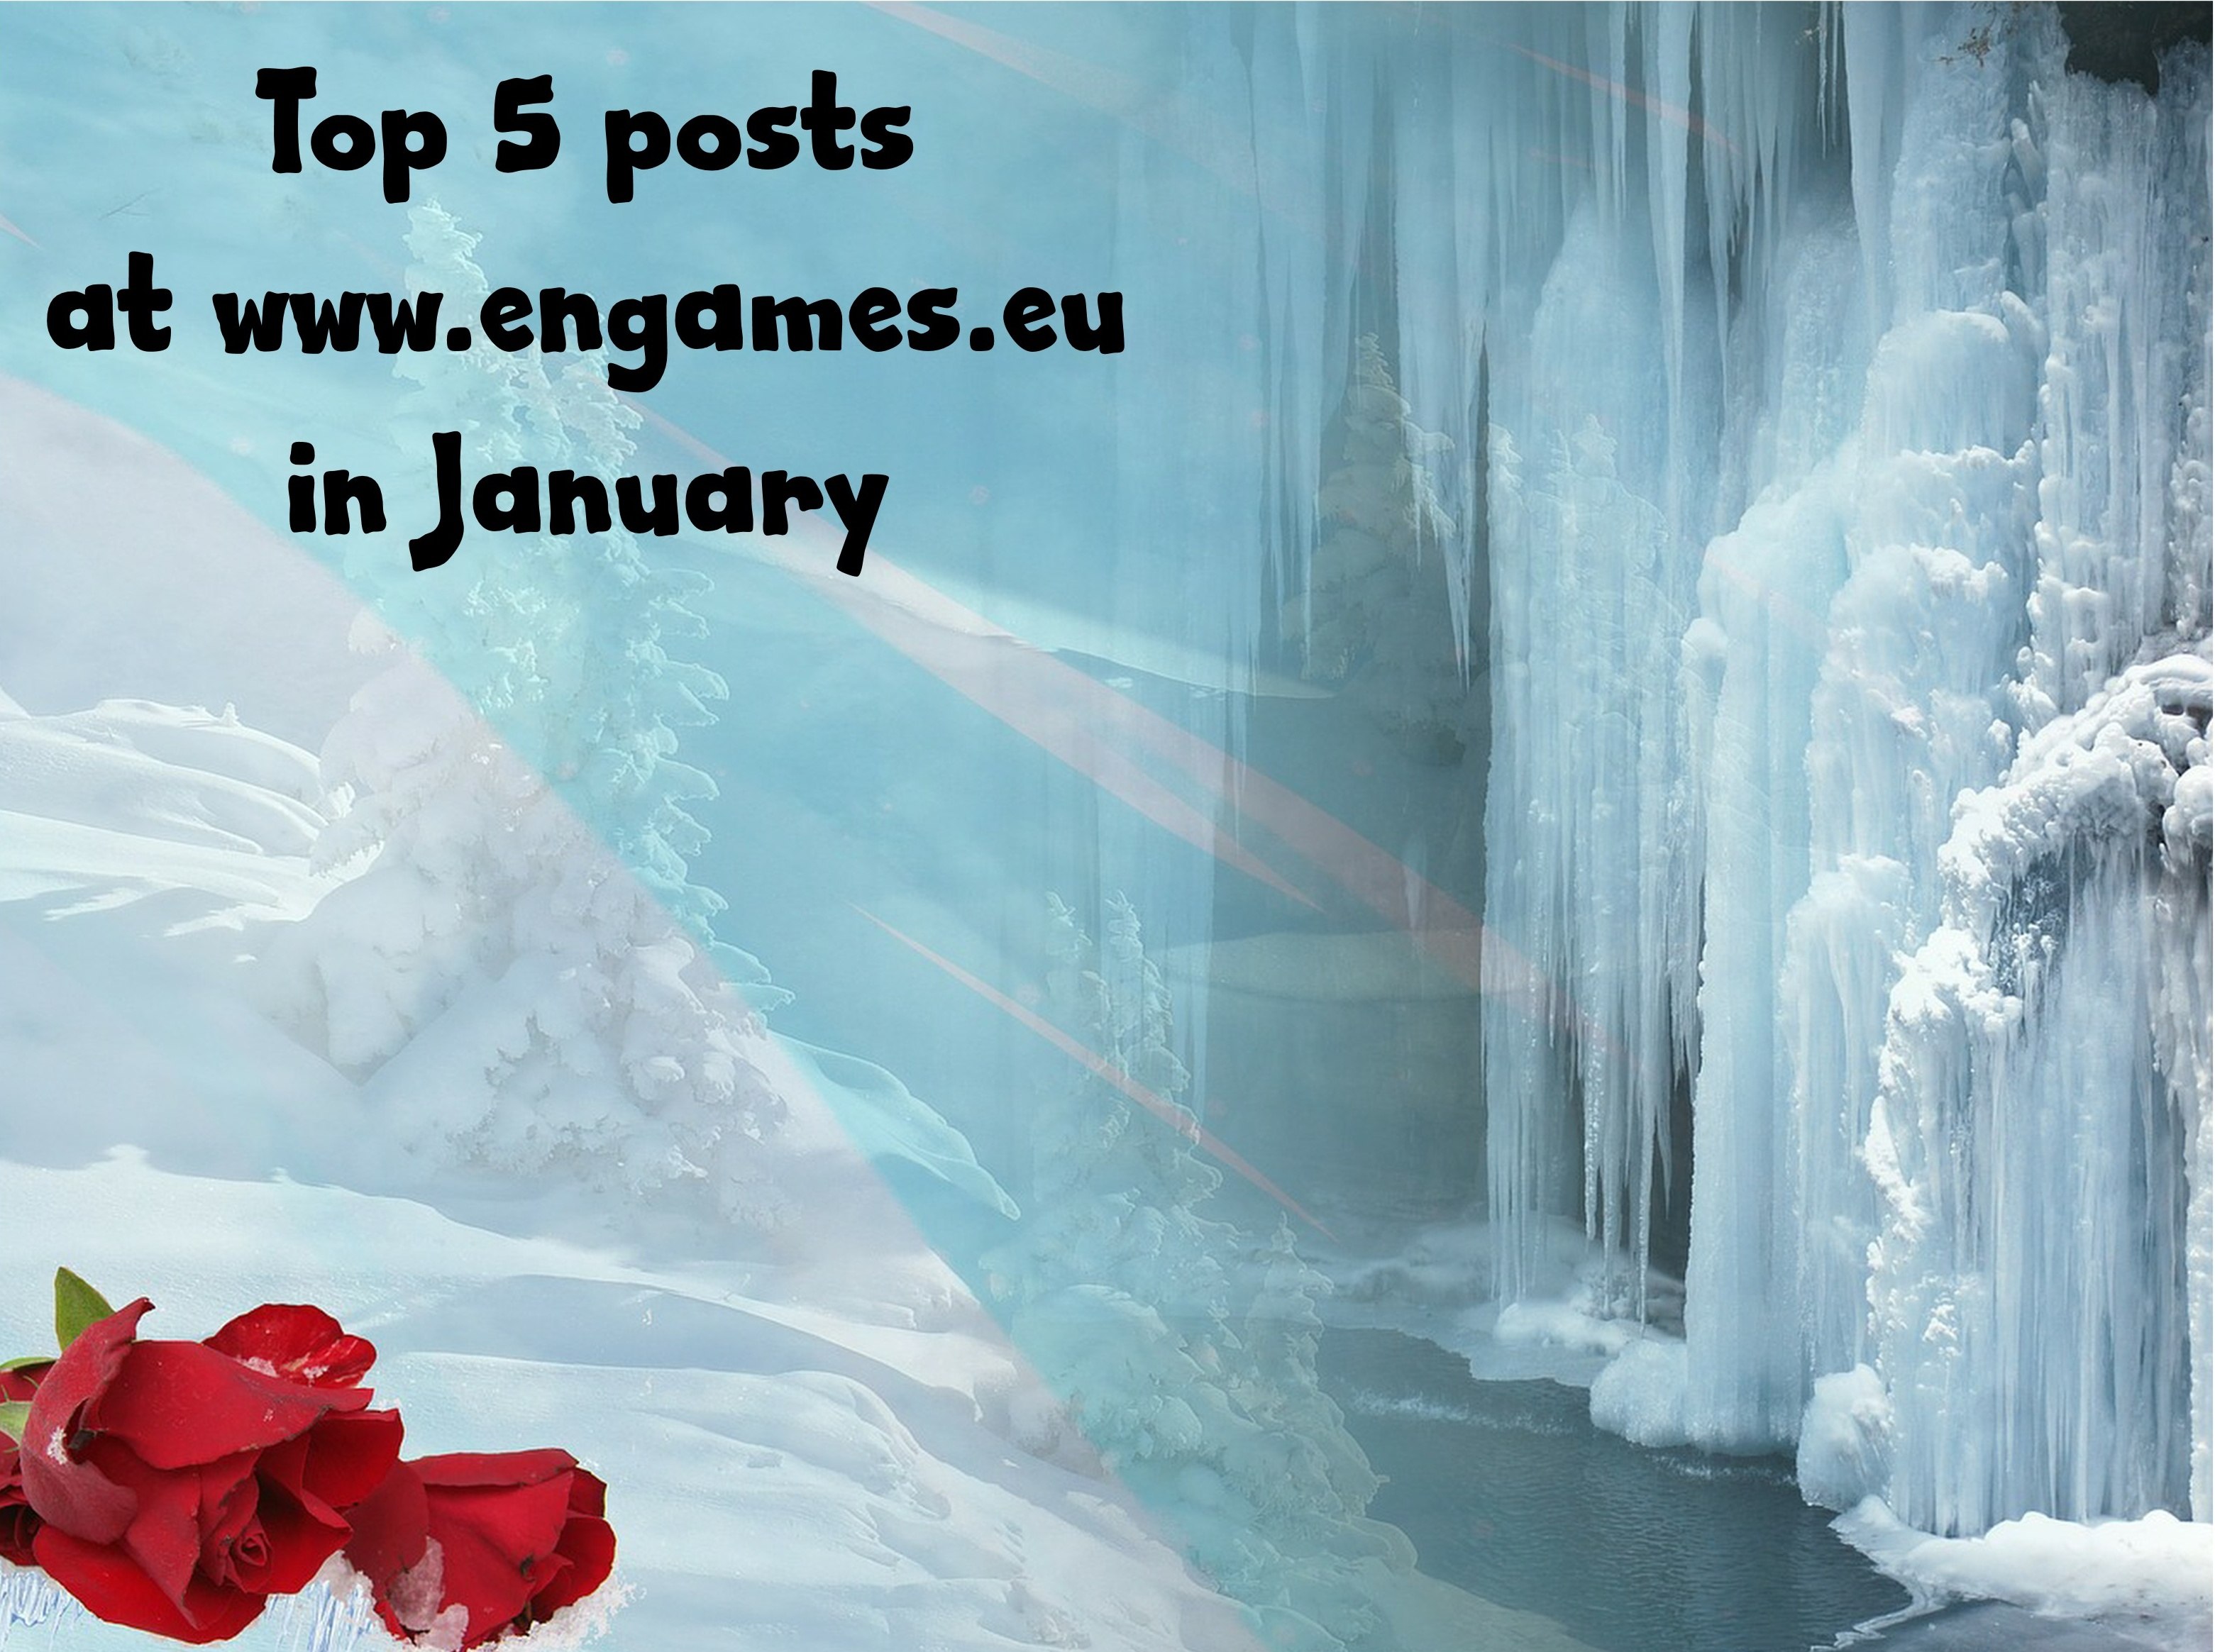 top 5 posts at engames